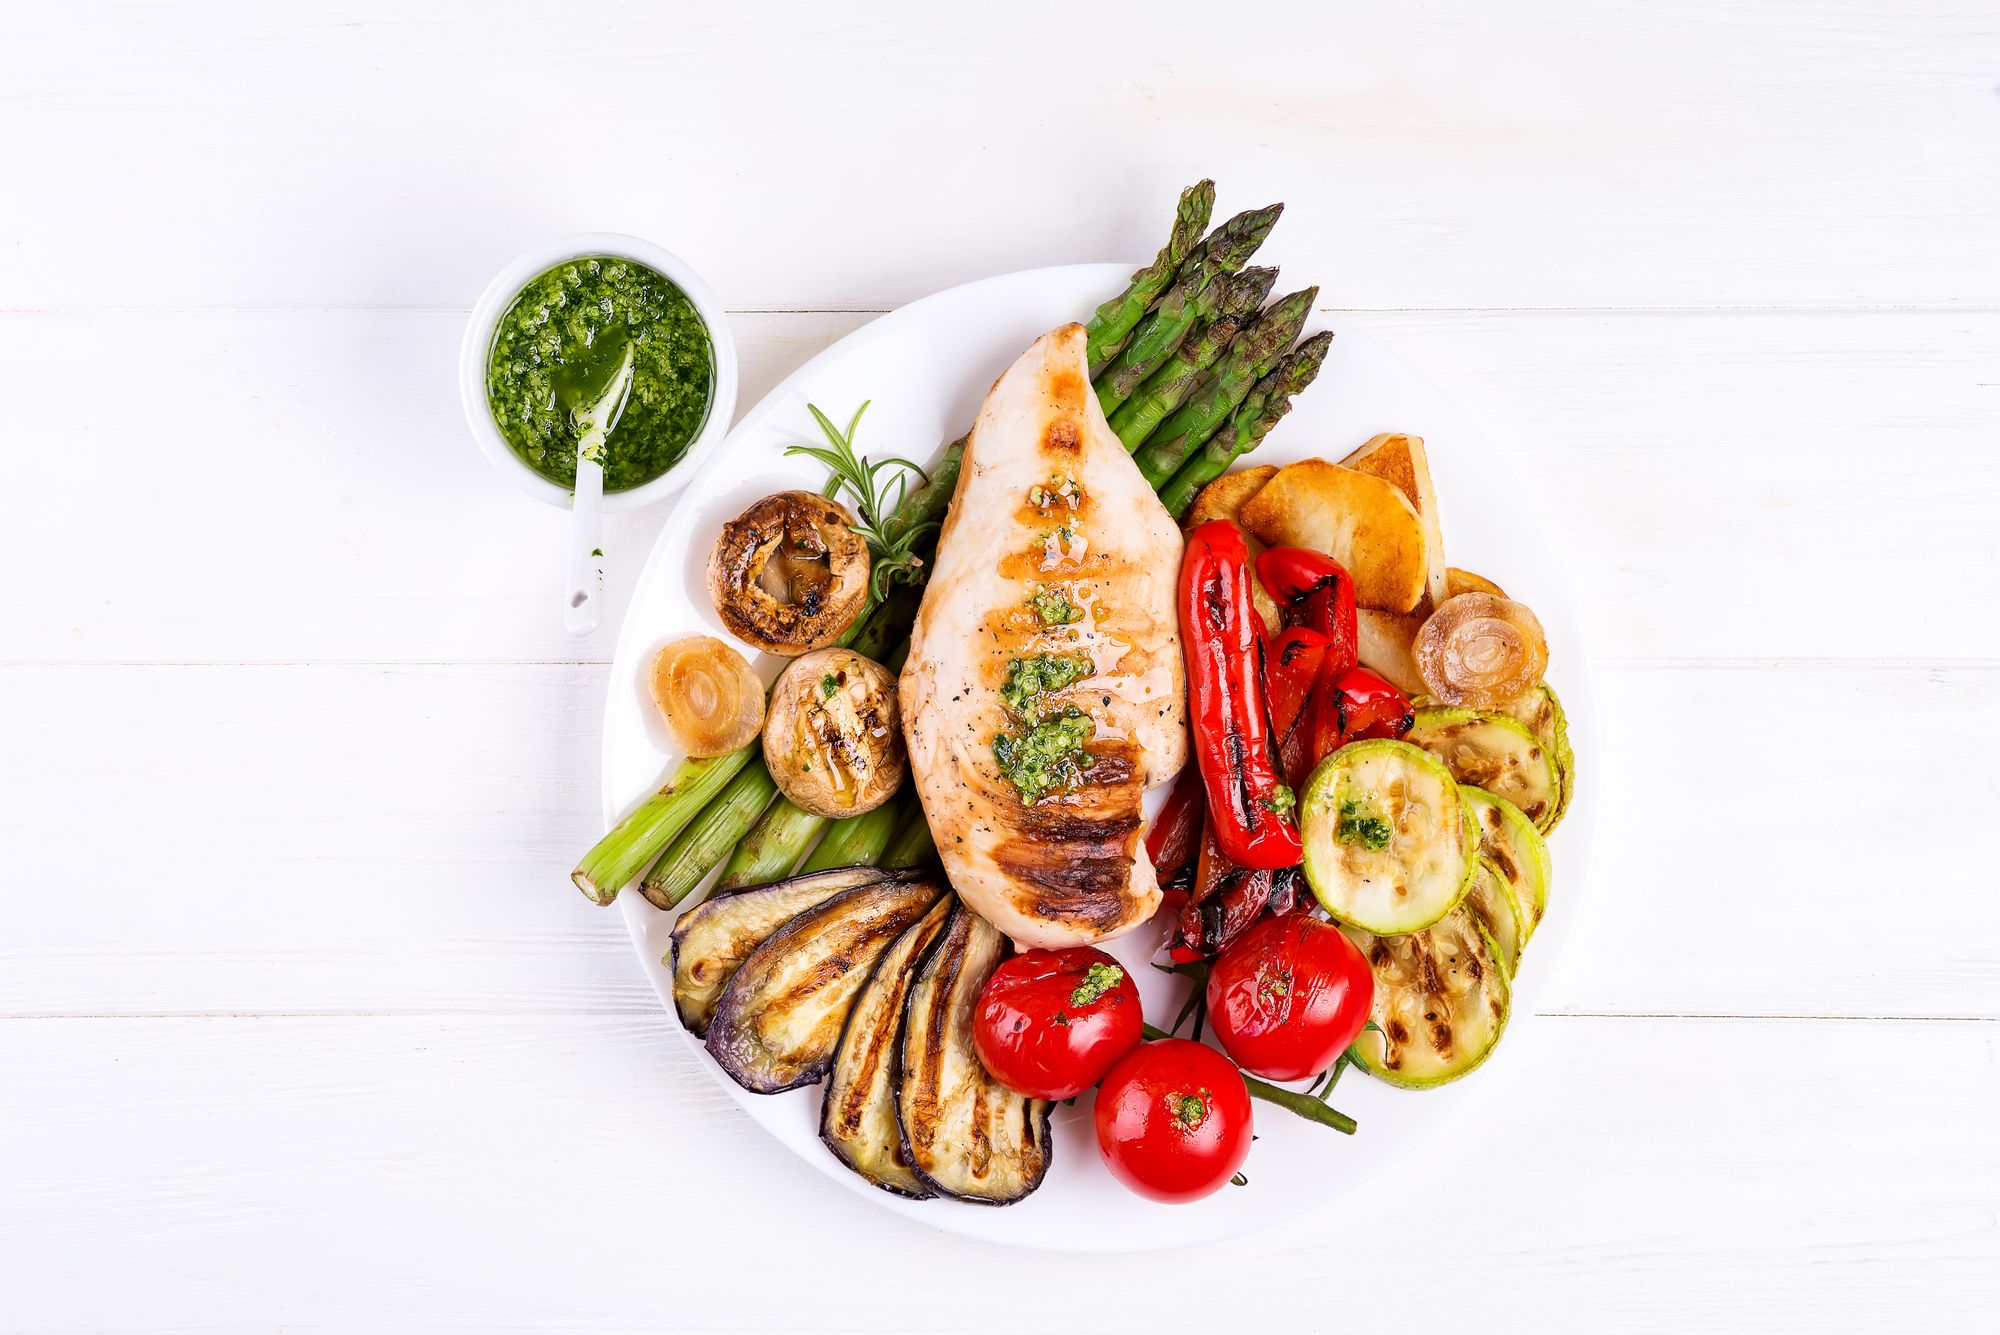 Grilled Chicken with Pesto